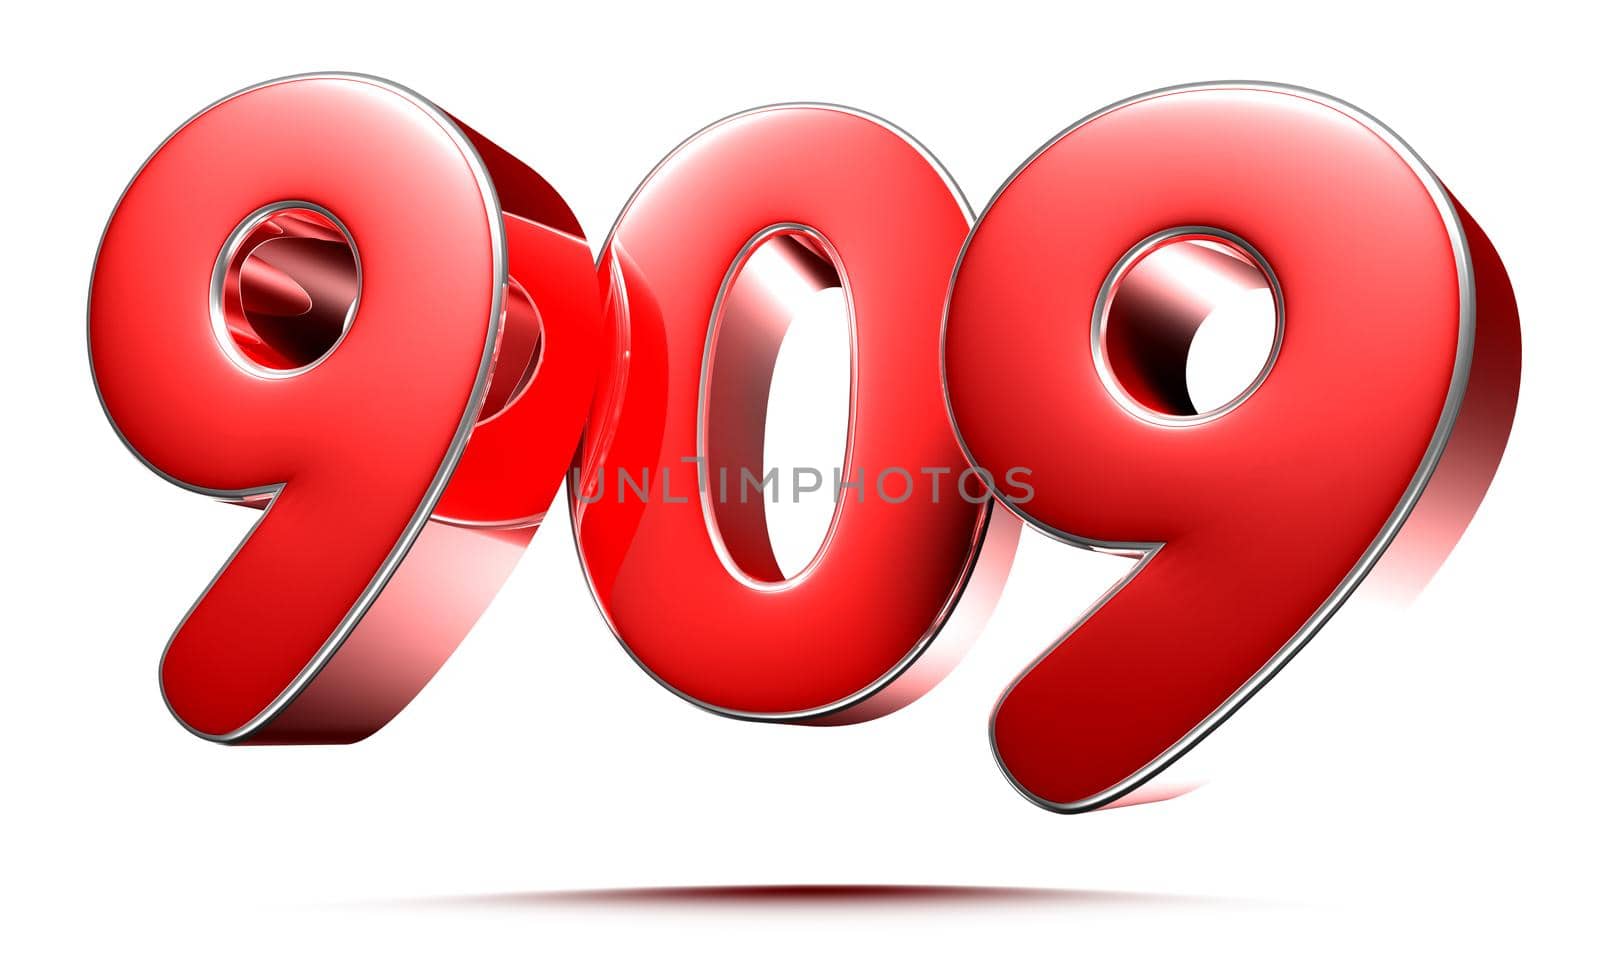 Rounded red numbers 909 on white background 3D illustration with clipping path by thitimontoyai